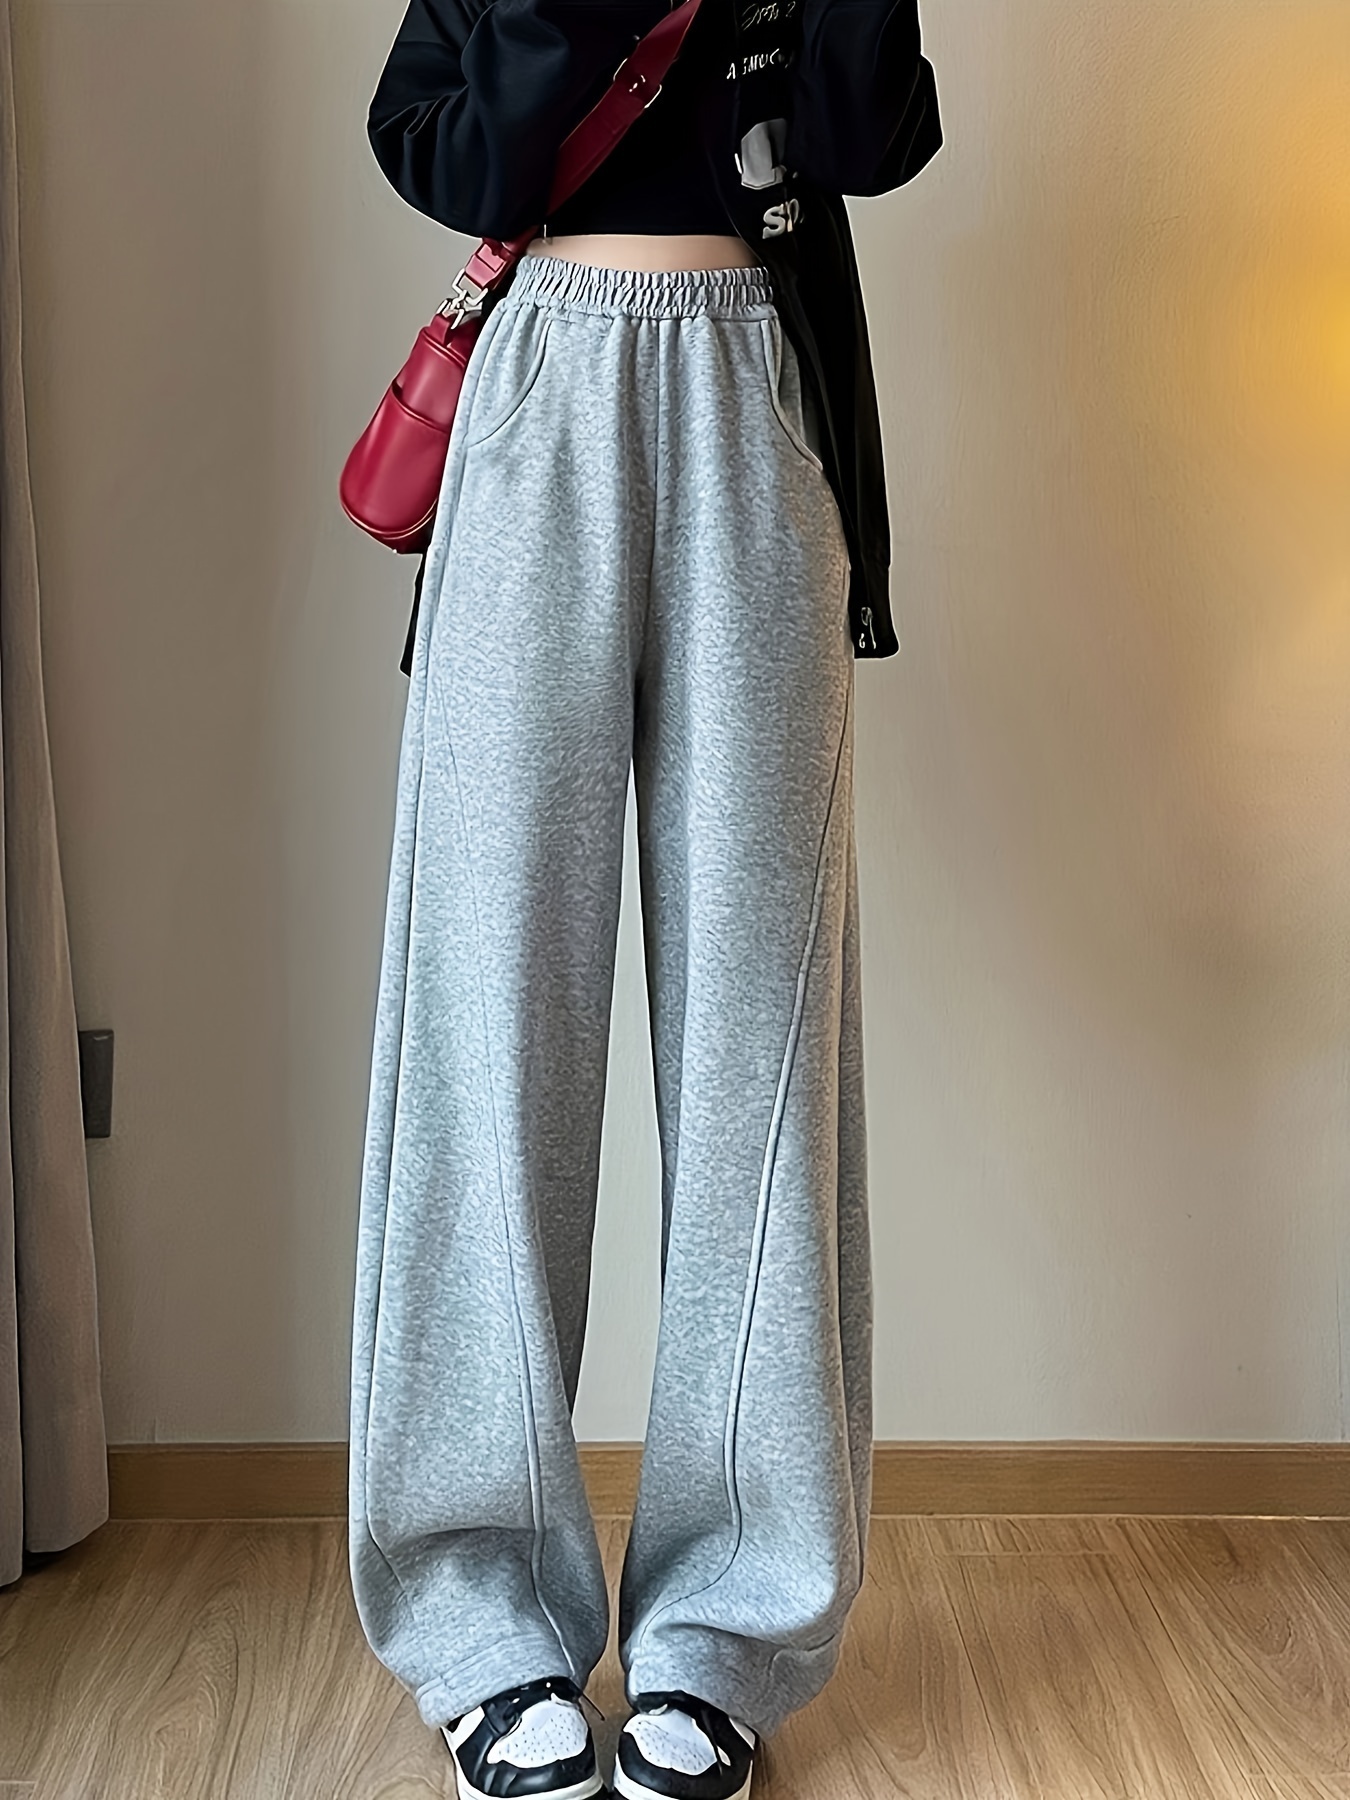 solid elastic high waist sweatpants, solid elastic high waist sweatpants casual sporty wide leg pants with pocket womens clothing details 13